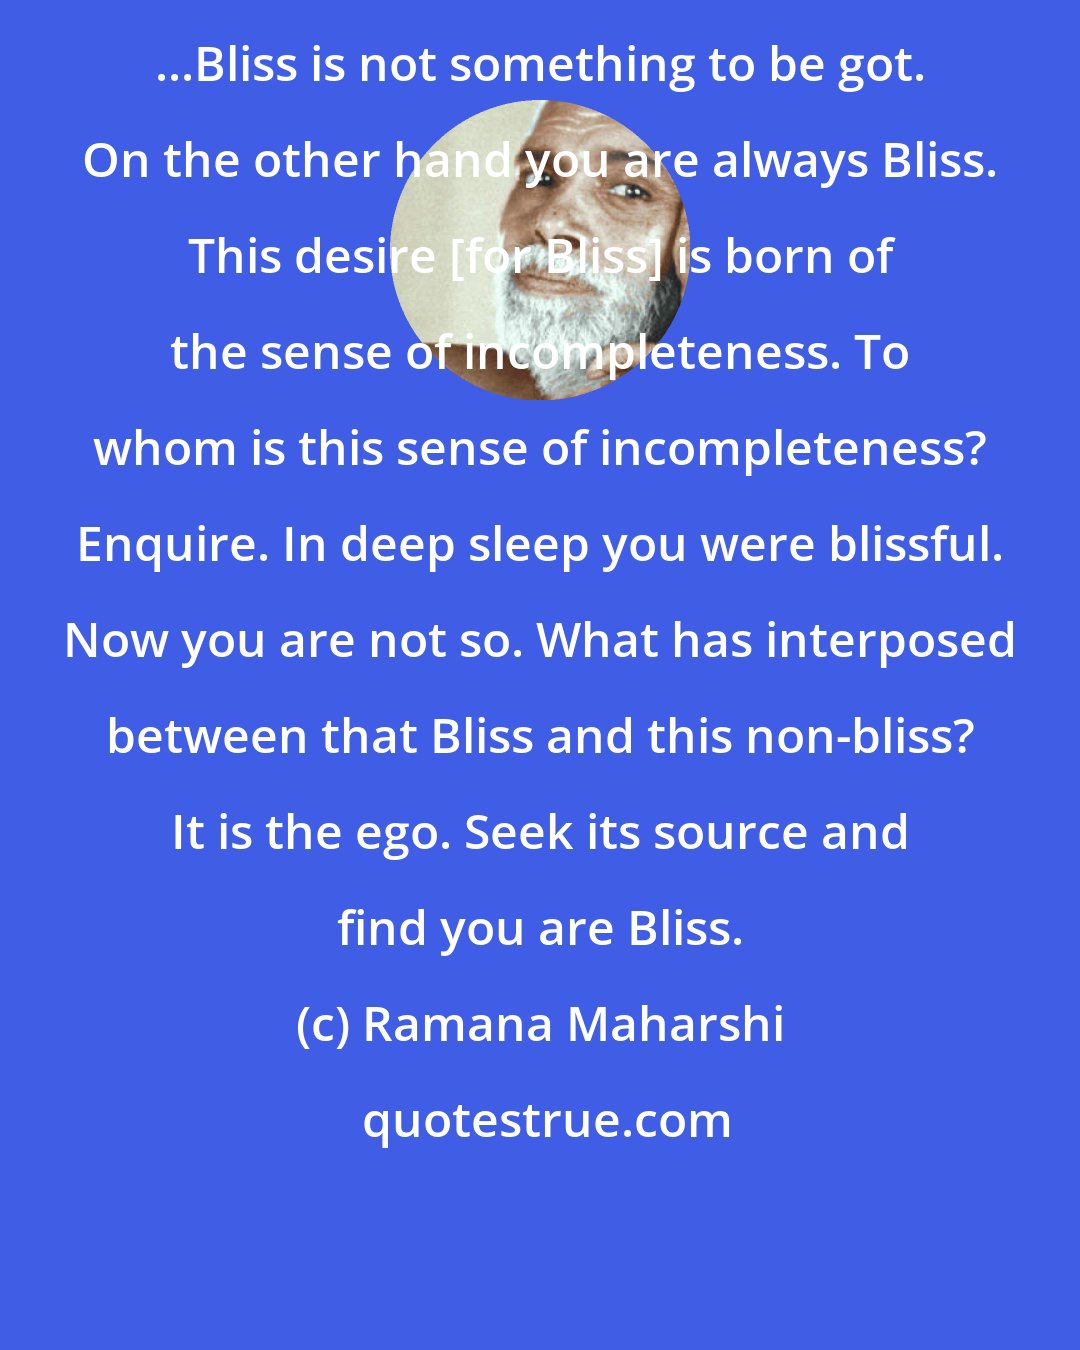 Ramana Maharshi: ...Bliss is not something to be got. On the other hand you are always Bliss. This desire [for Bliss] is born of the sense of incompleteness. To whom is this sense of incompleteness? Enquire. In deep sleep you were blissful. Now you are not so. What has interposed between that Bliss and this non-bliss? It is the ego. Seek its source and find you are Bliss.